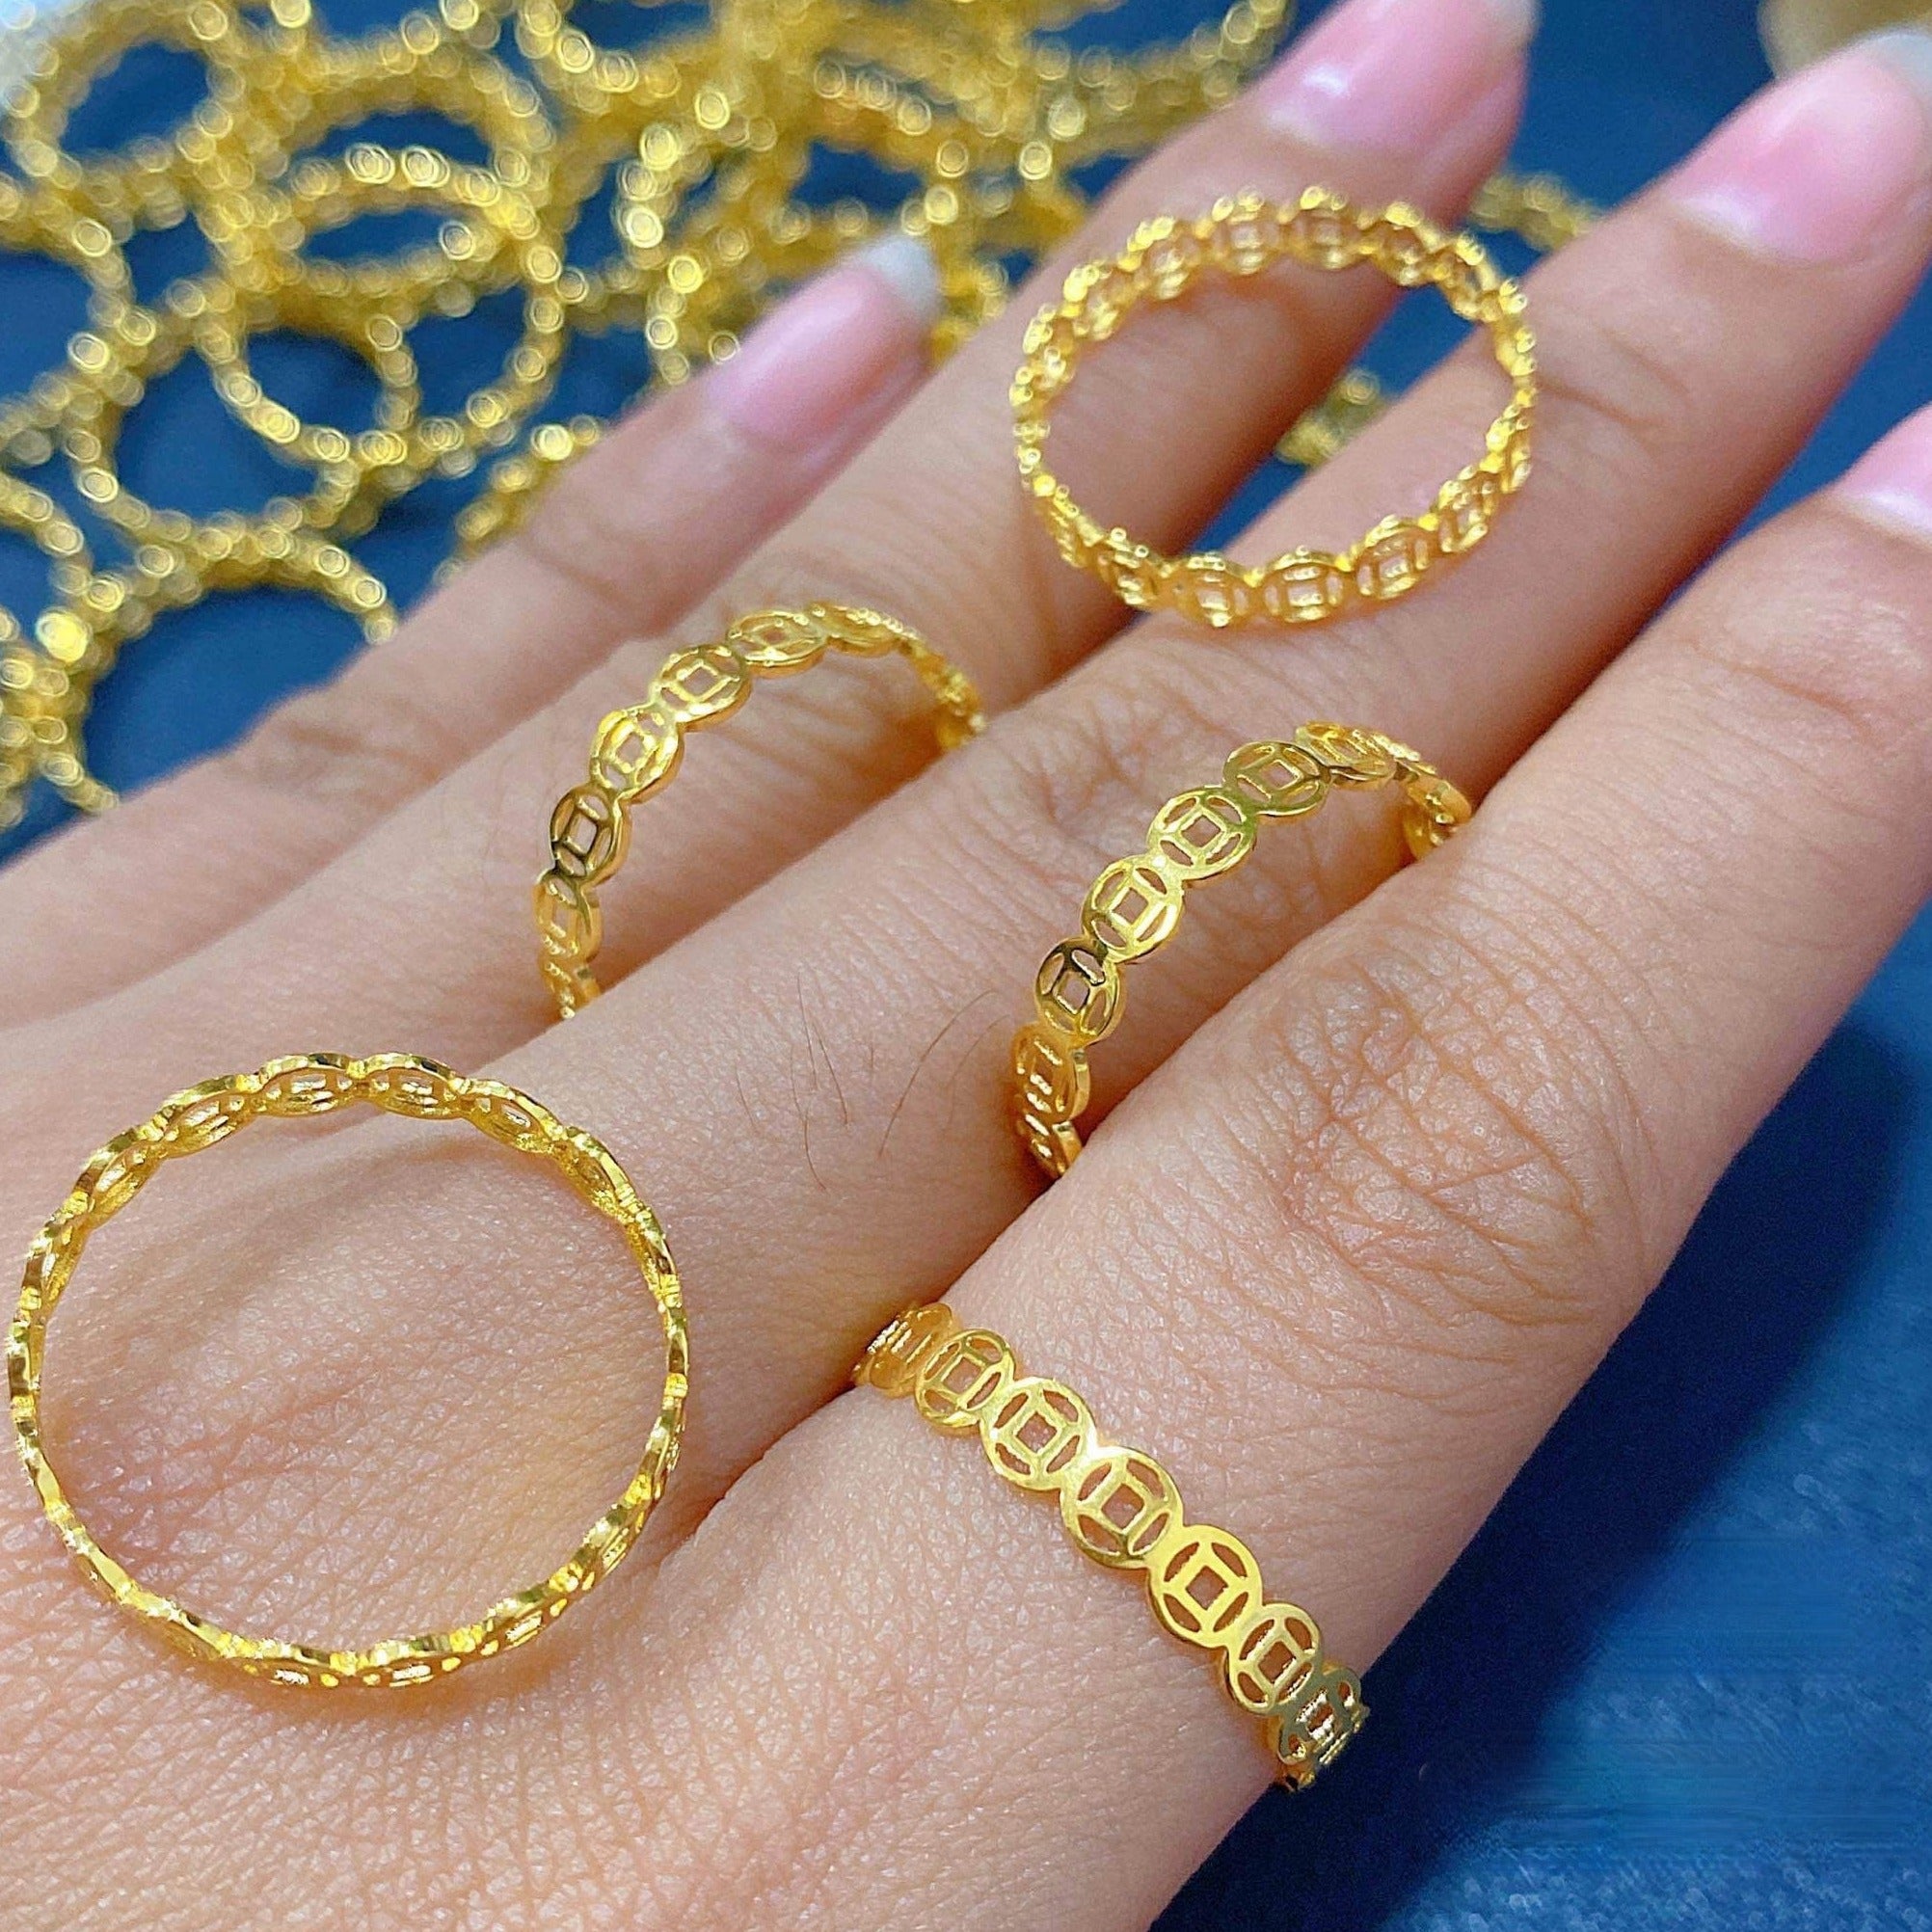 Twin Coin Ring in Gold | Handcrafted Jewellery – Dori